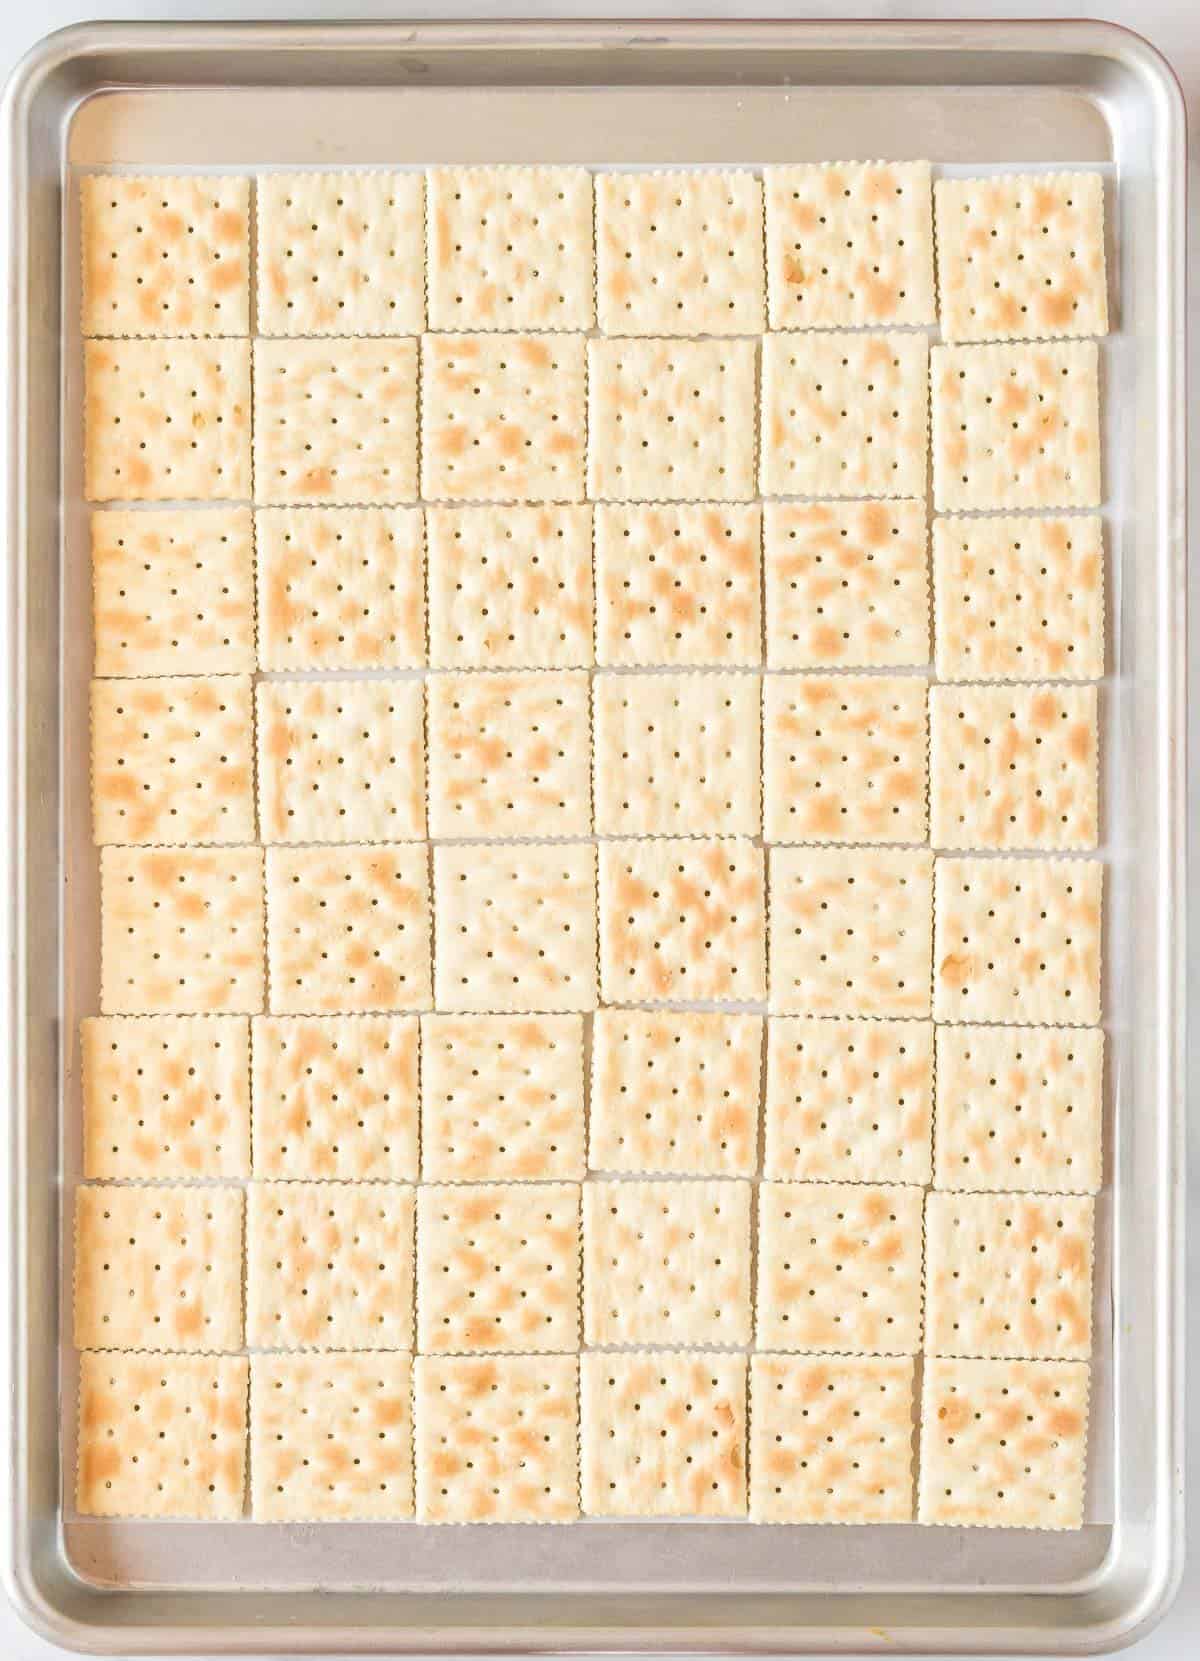 saltines lined up on a baking sheet